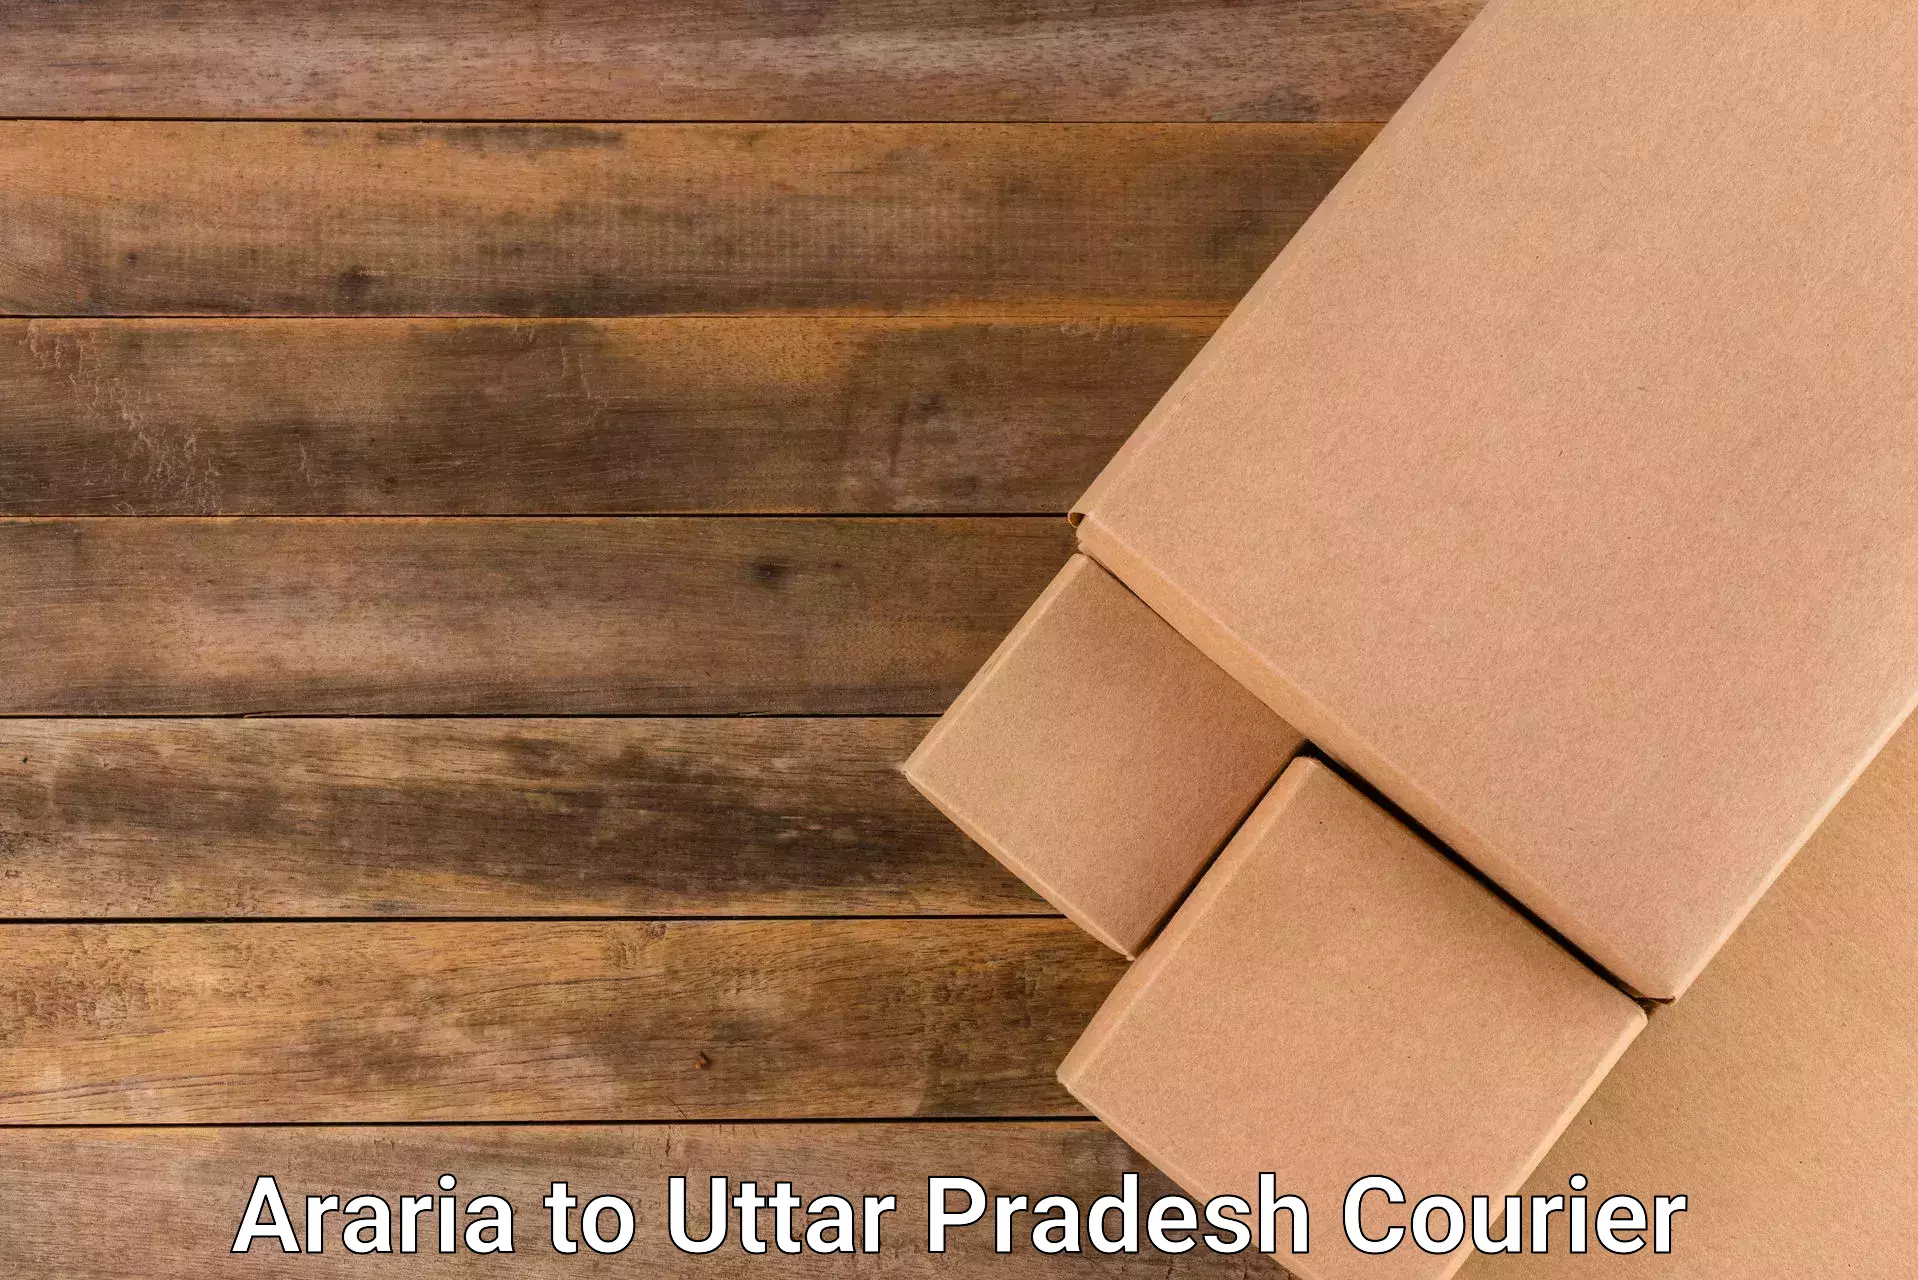 Courier app Araria to Pilkhuwa